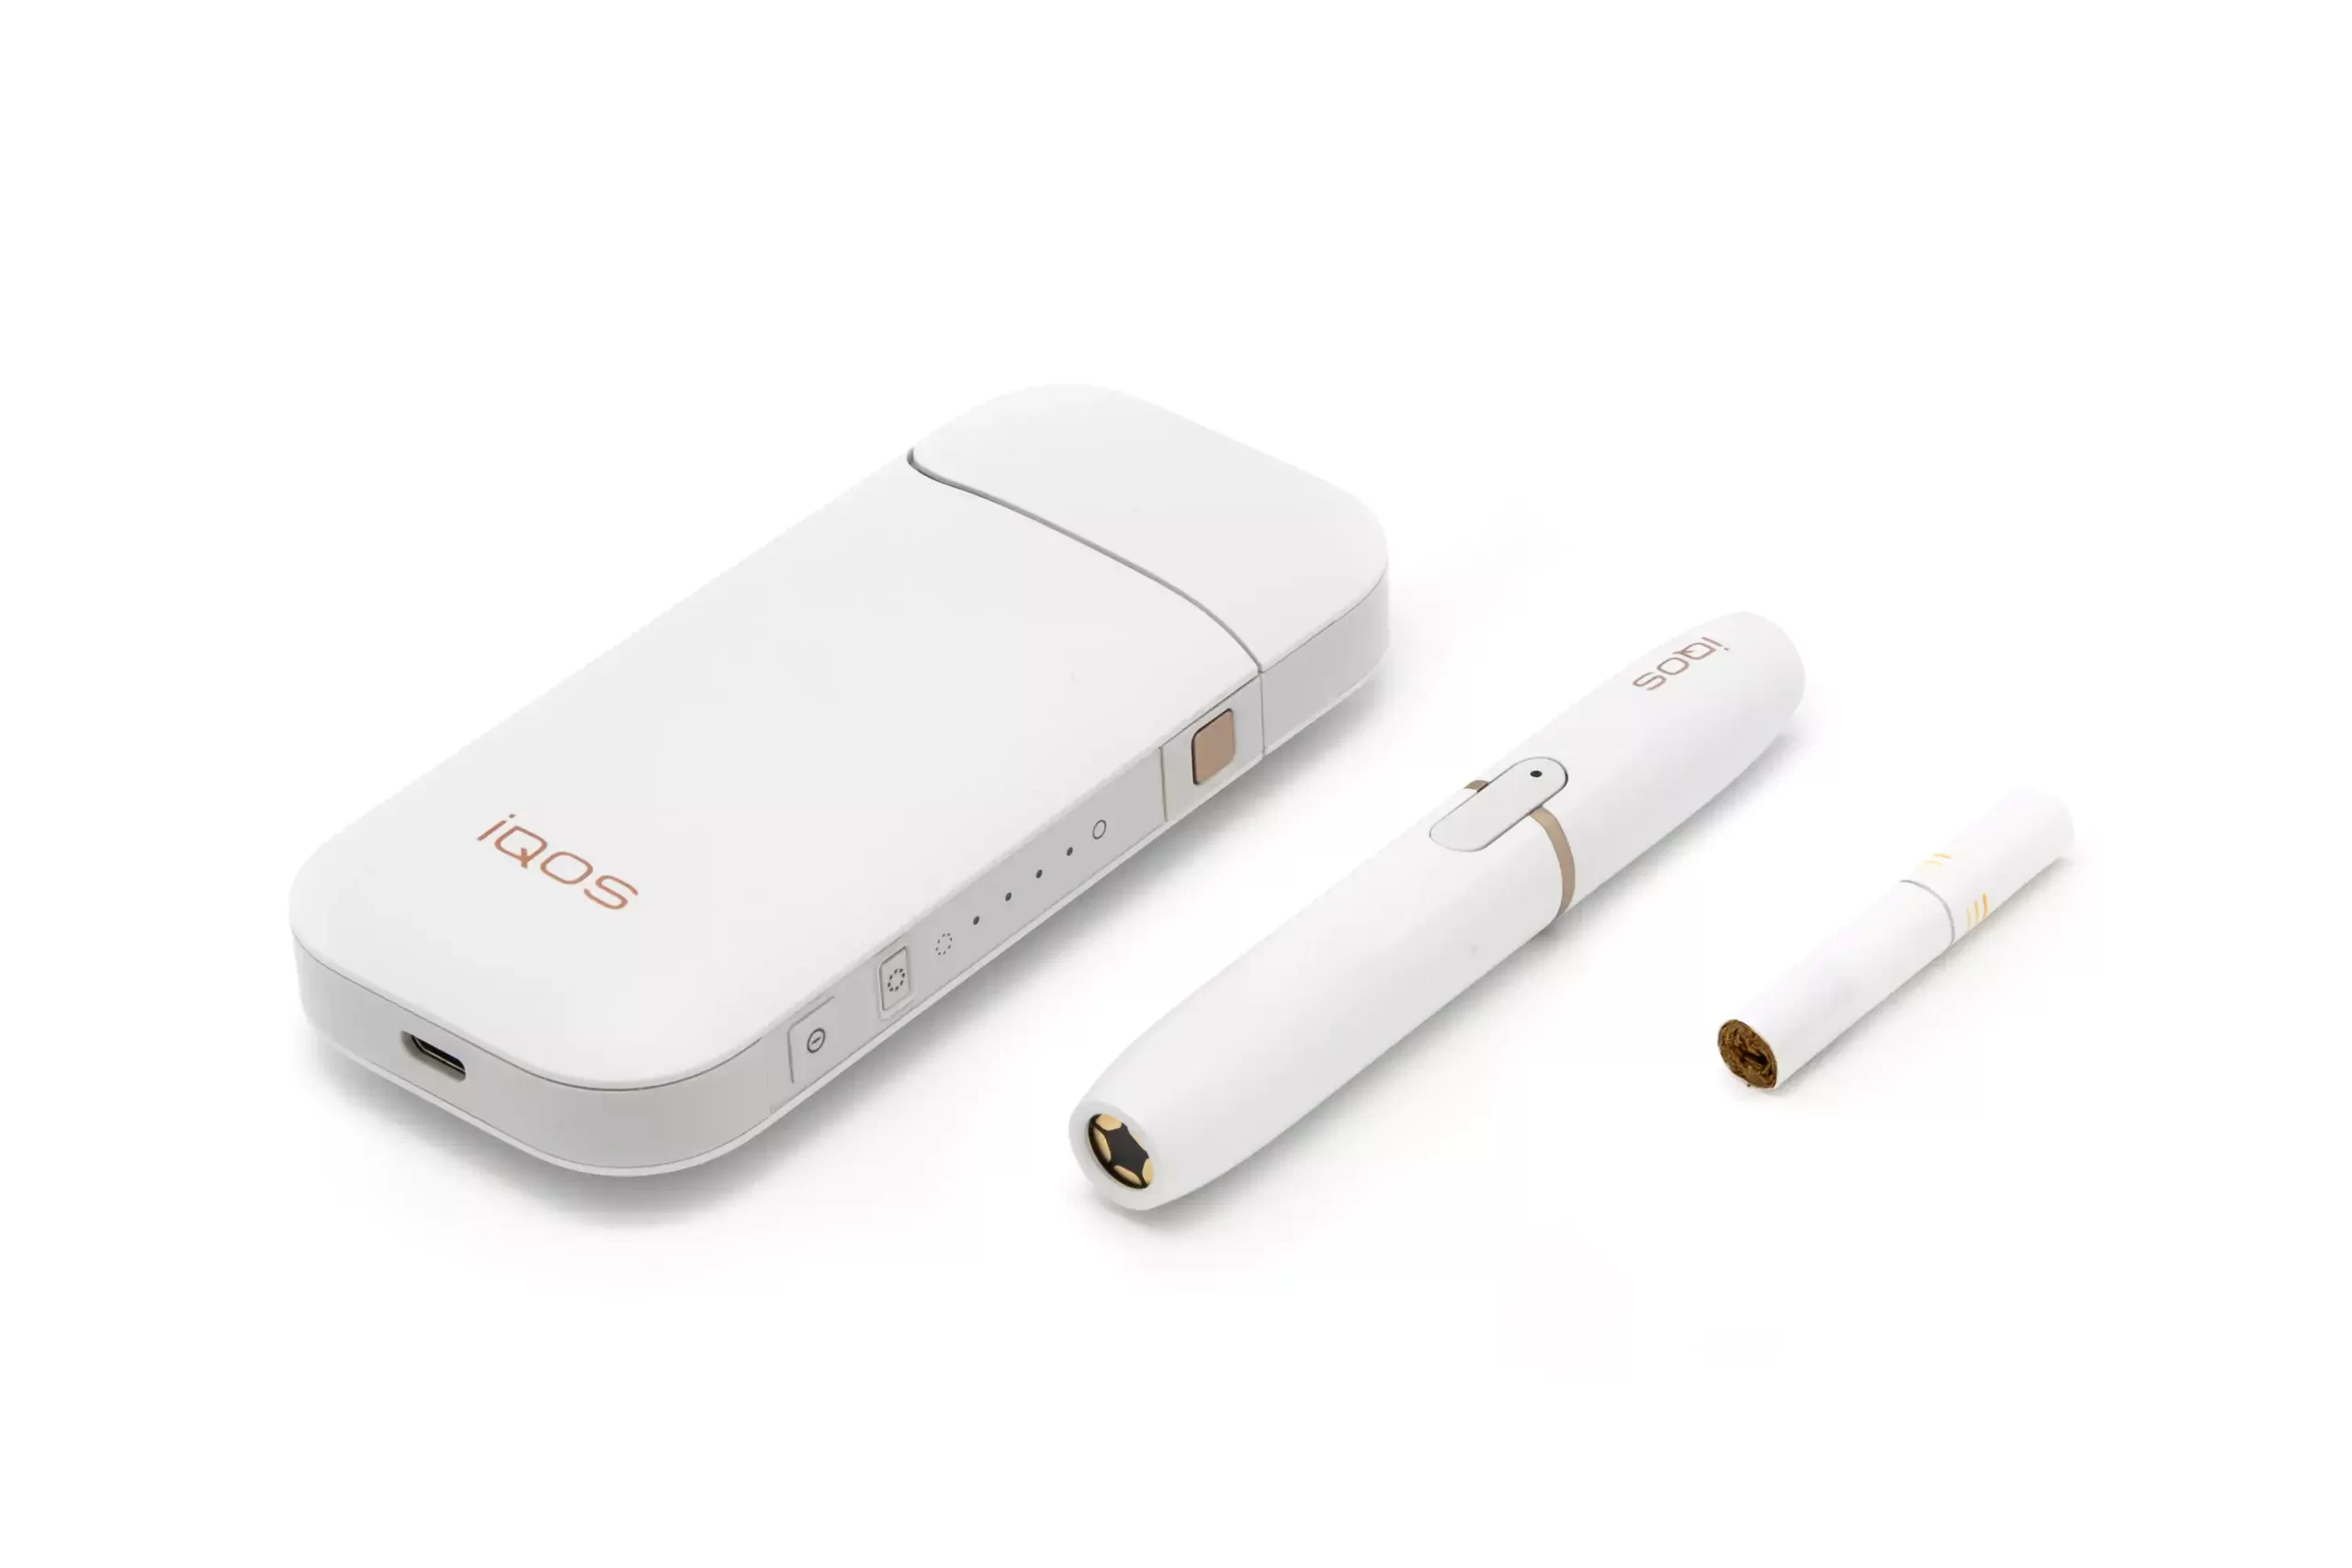 IQOS Vape Review: The Future of Smoking or Just Another Gimmick-KEYSTONE:  Leading Vape Brand in Disposable Vape & Pod System Device